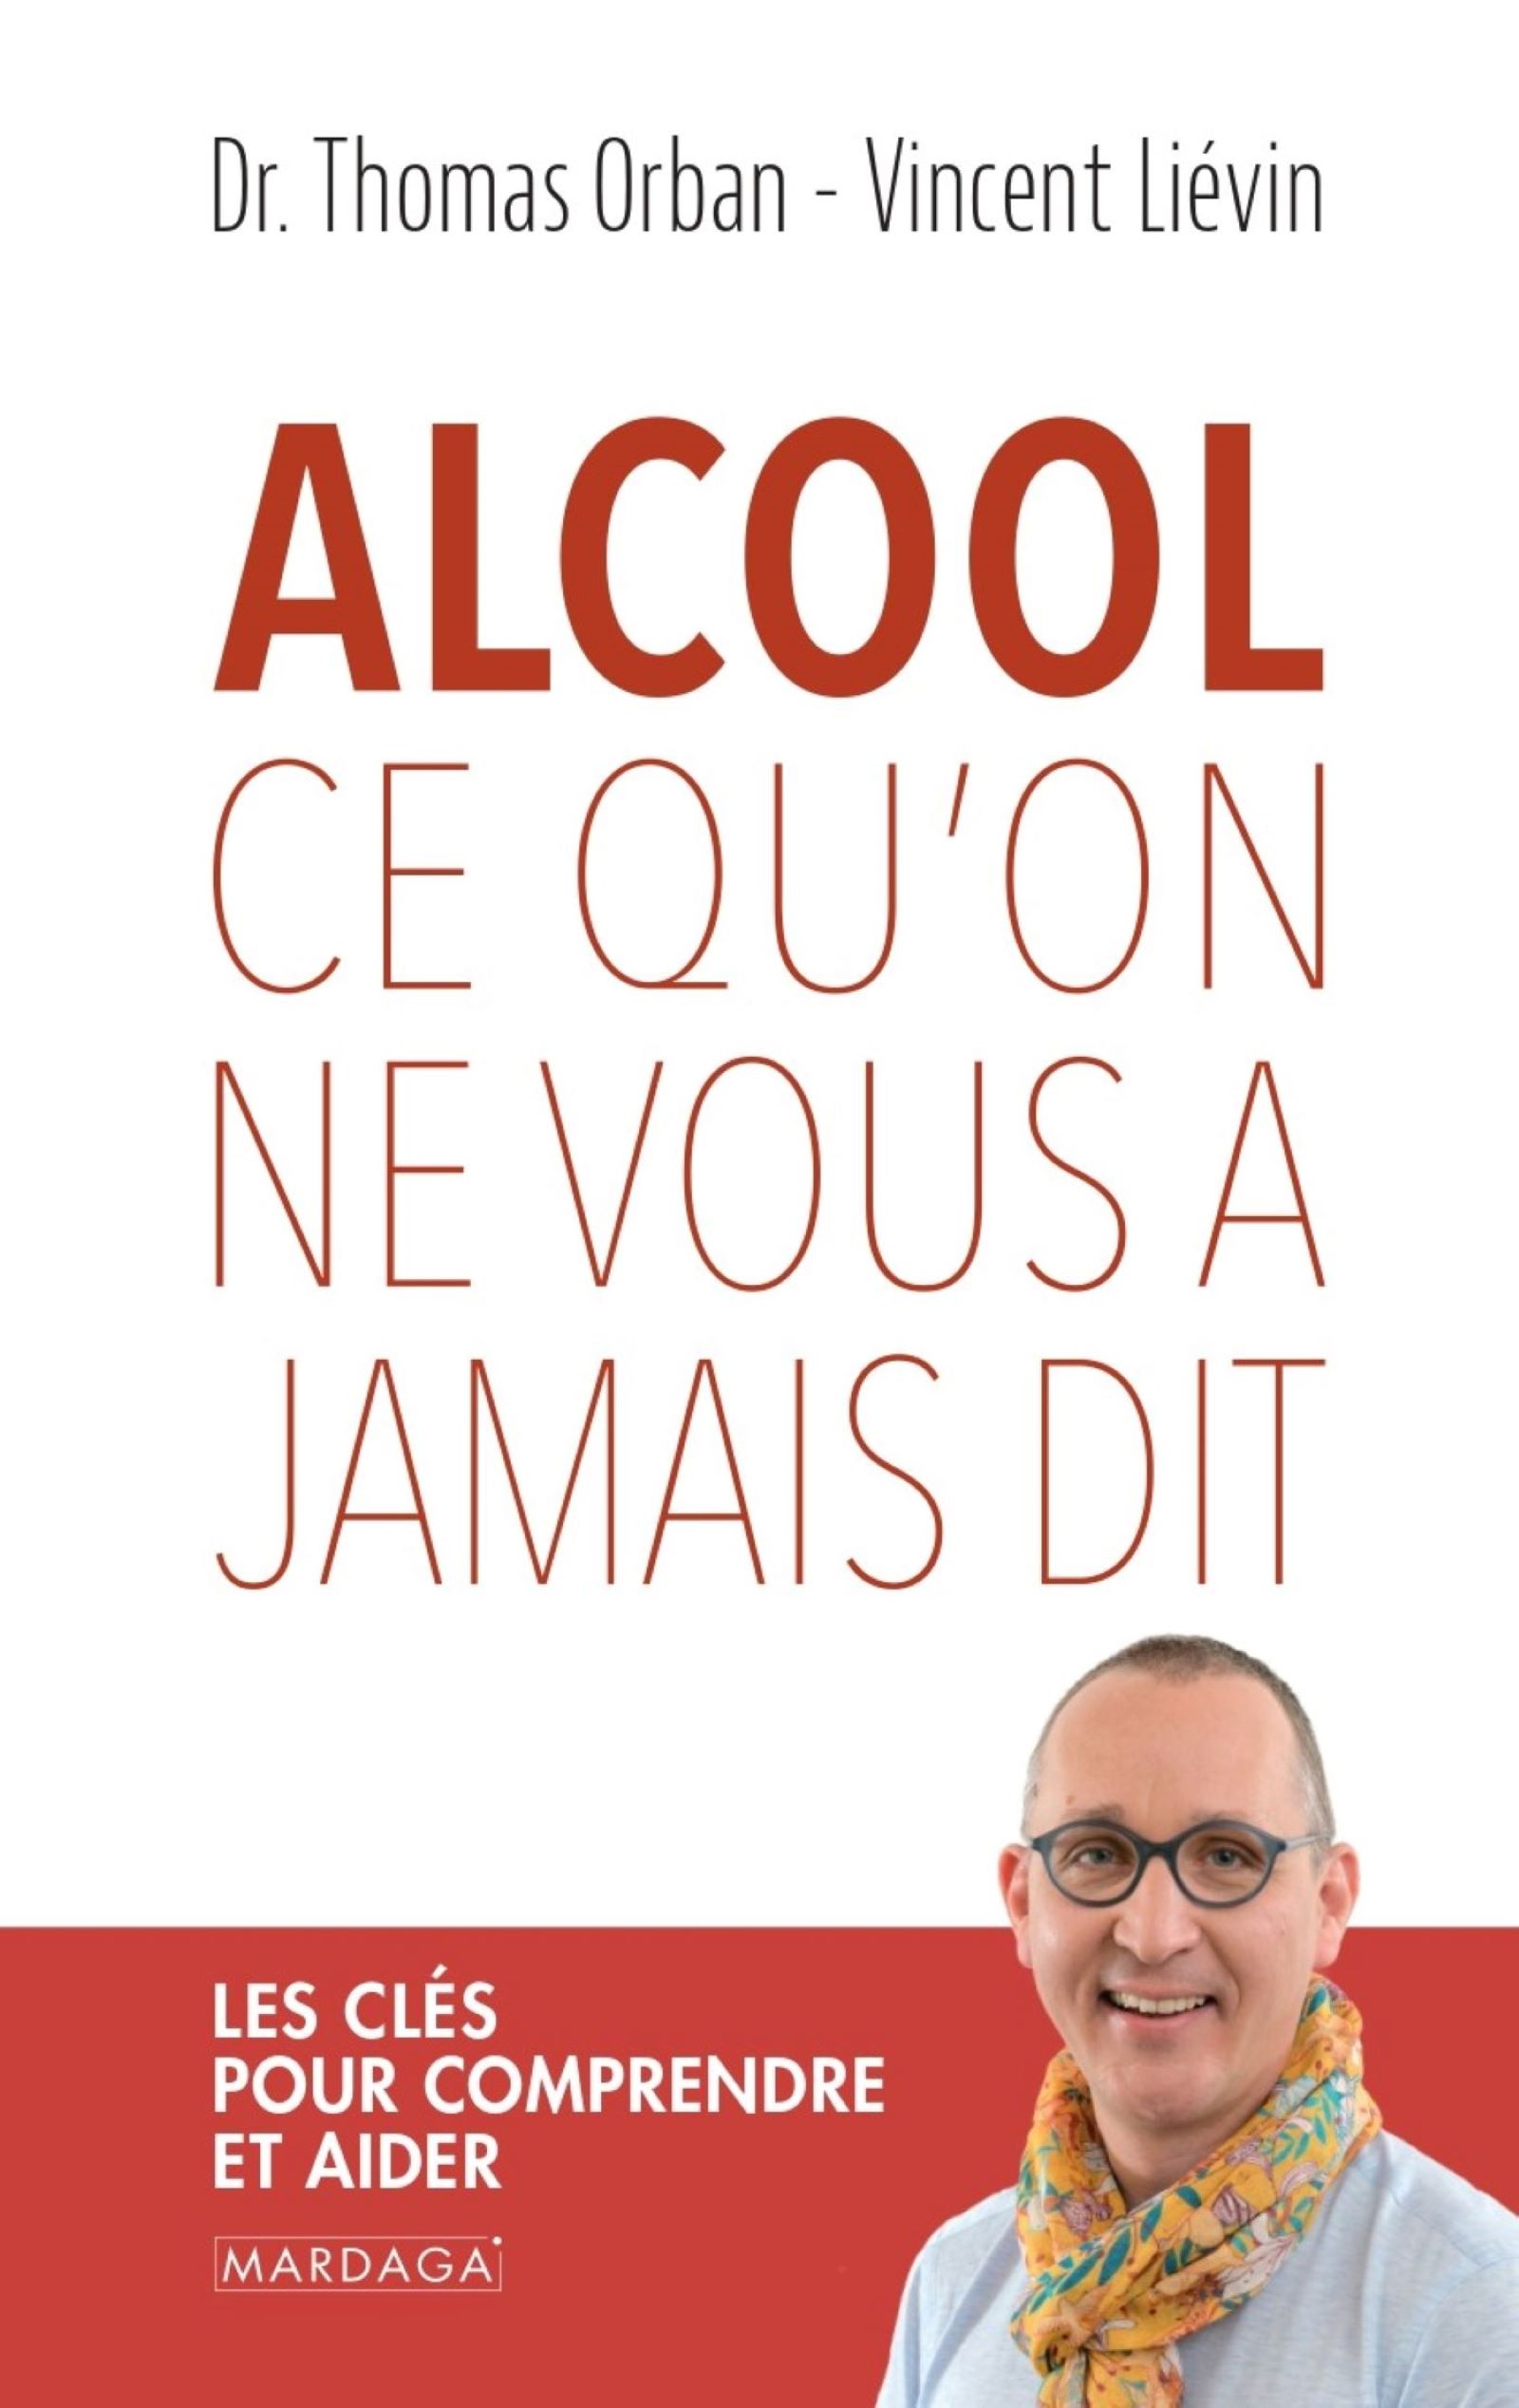 Alcool - Ce qu'on ne vous a jamais dit / What They Don?t Tell You About Alcohol